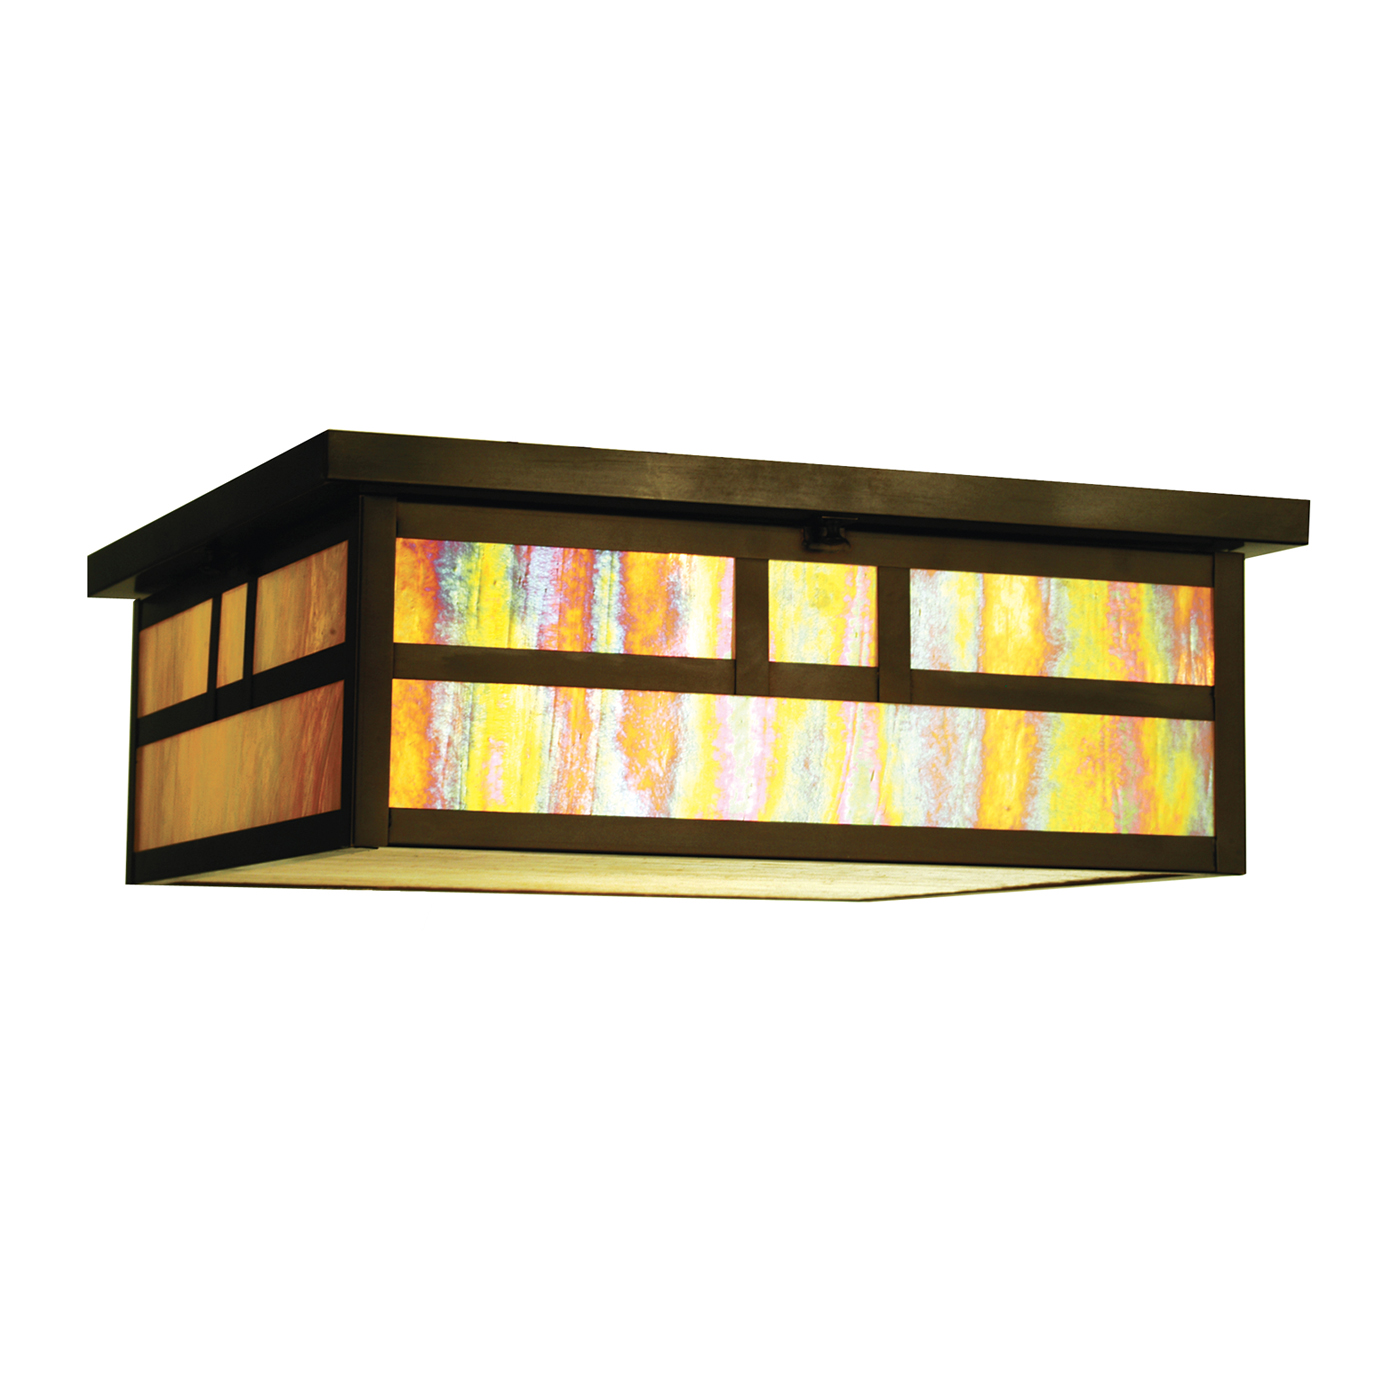 Craftsman Style Ceiling Light Illuminate Entire Rooms With Minimal Obstruction Warisan Lighting